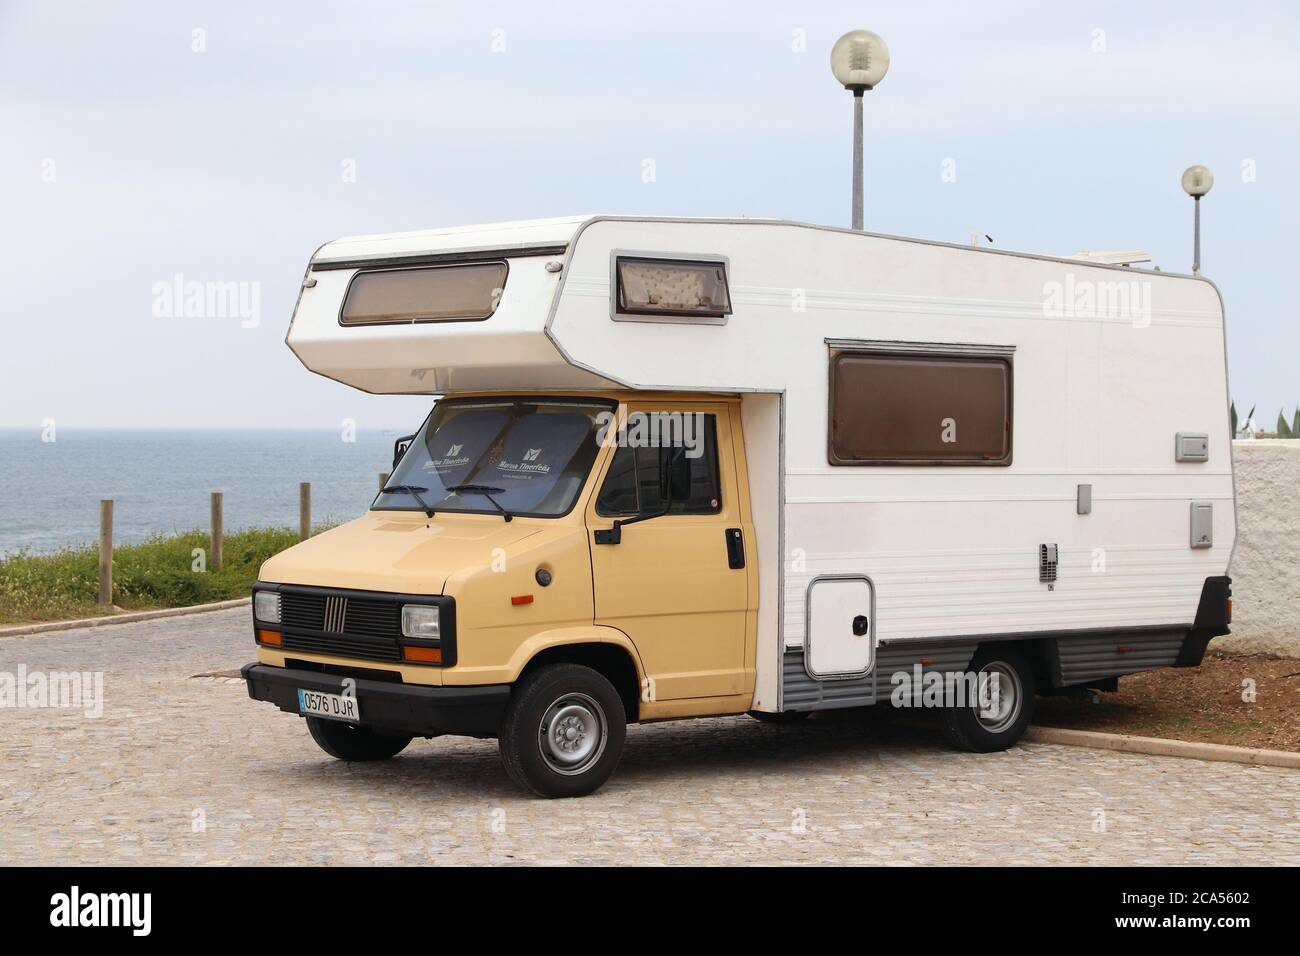 BALEAL, PORTUGAL - MAY 22, 2018: Cheap oldtimer backpacker camper van Fiat  Ducato parked in Portugal. 25.9 million tourists visited Portugal in 2018  Stock Photo - Alamy